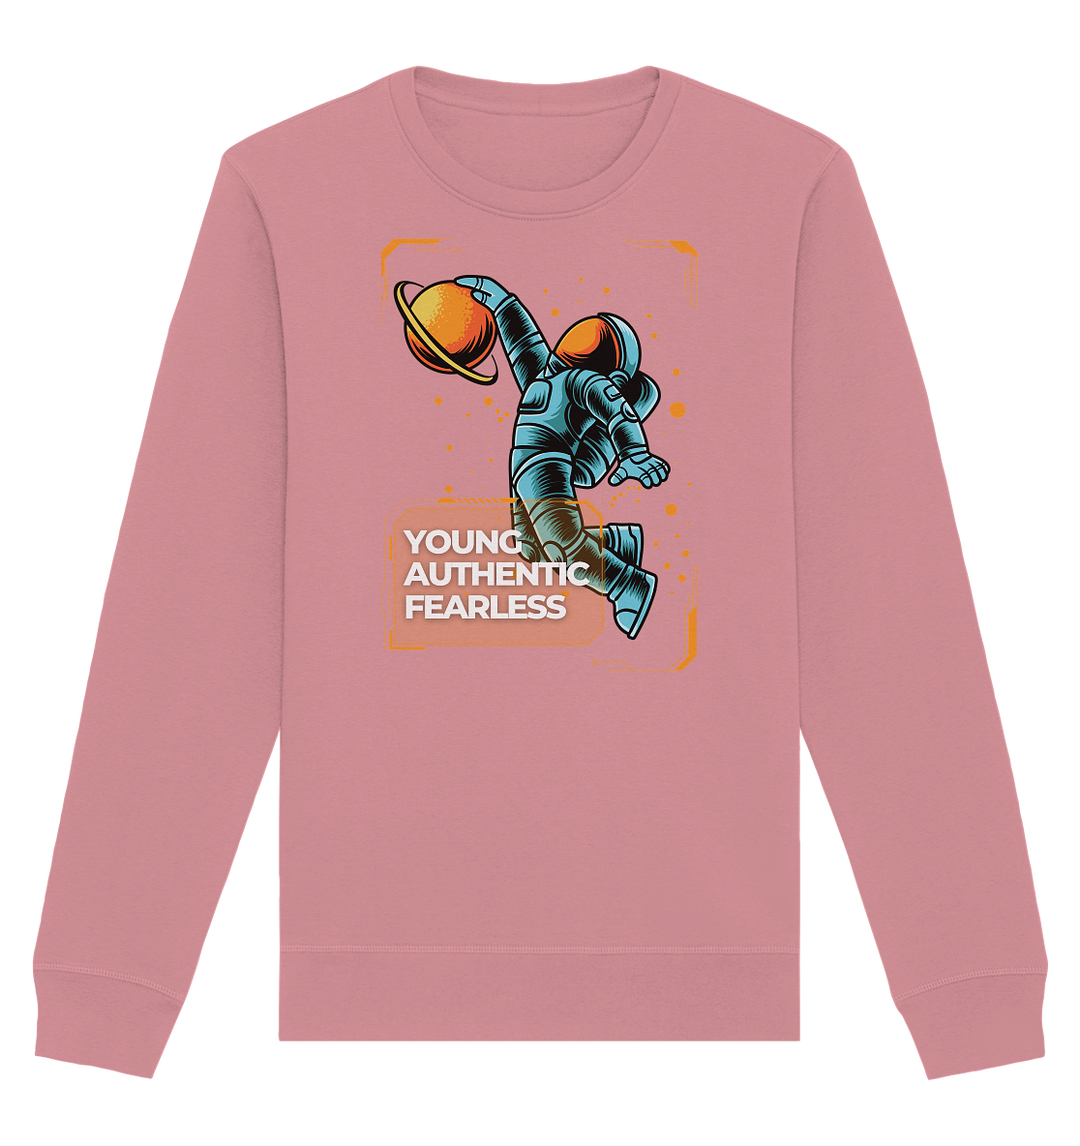 Young Authentic Fearless - Hope for the future - Organic Basic Unisex Sweatshirt